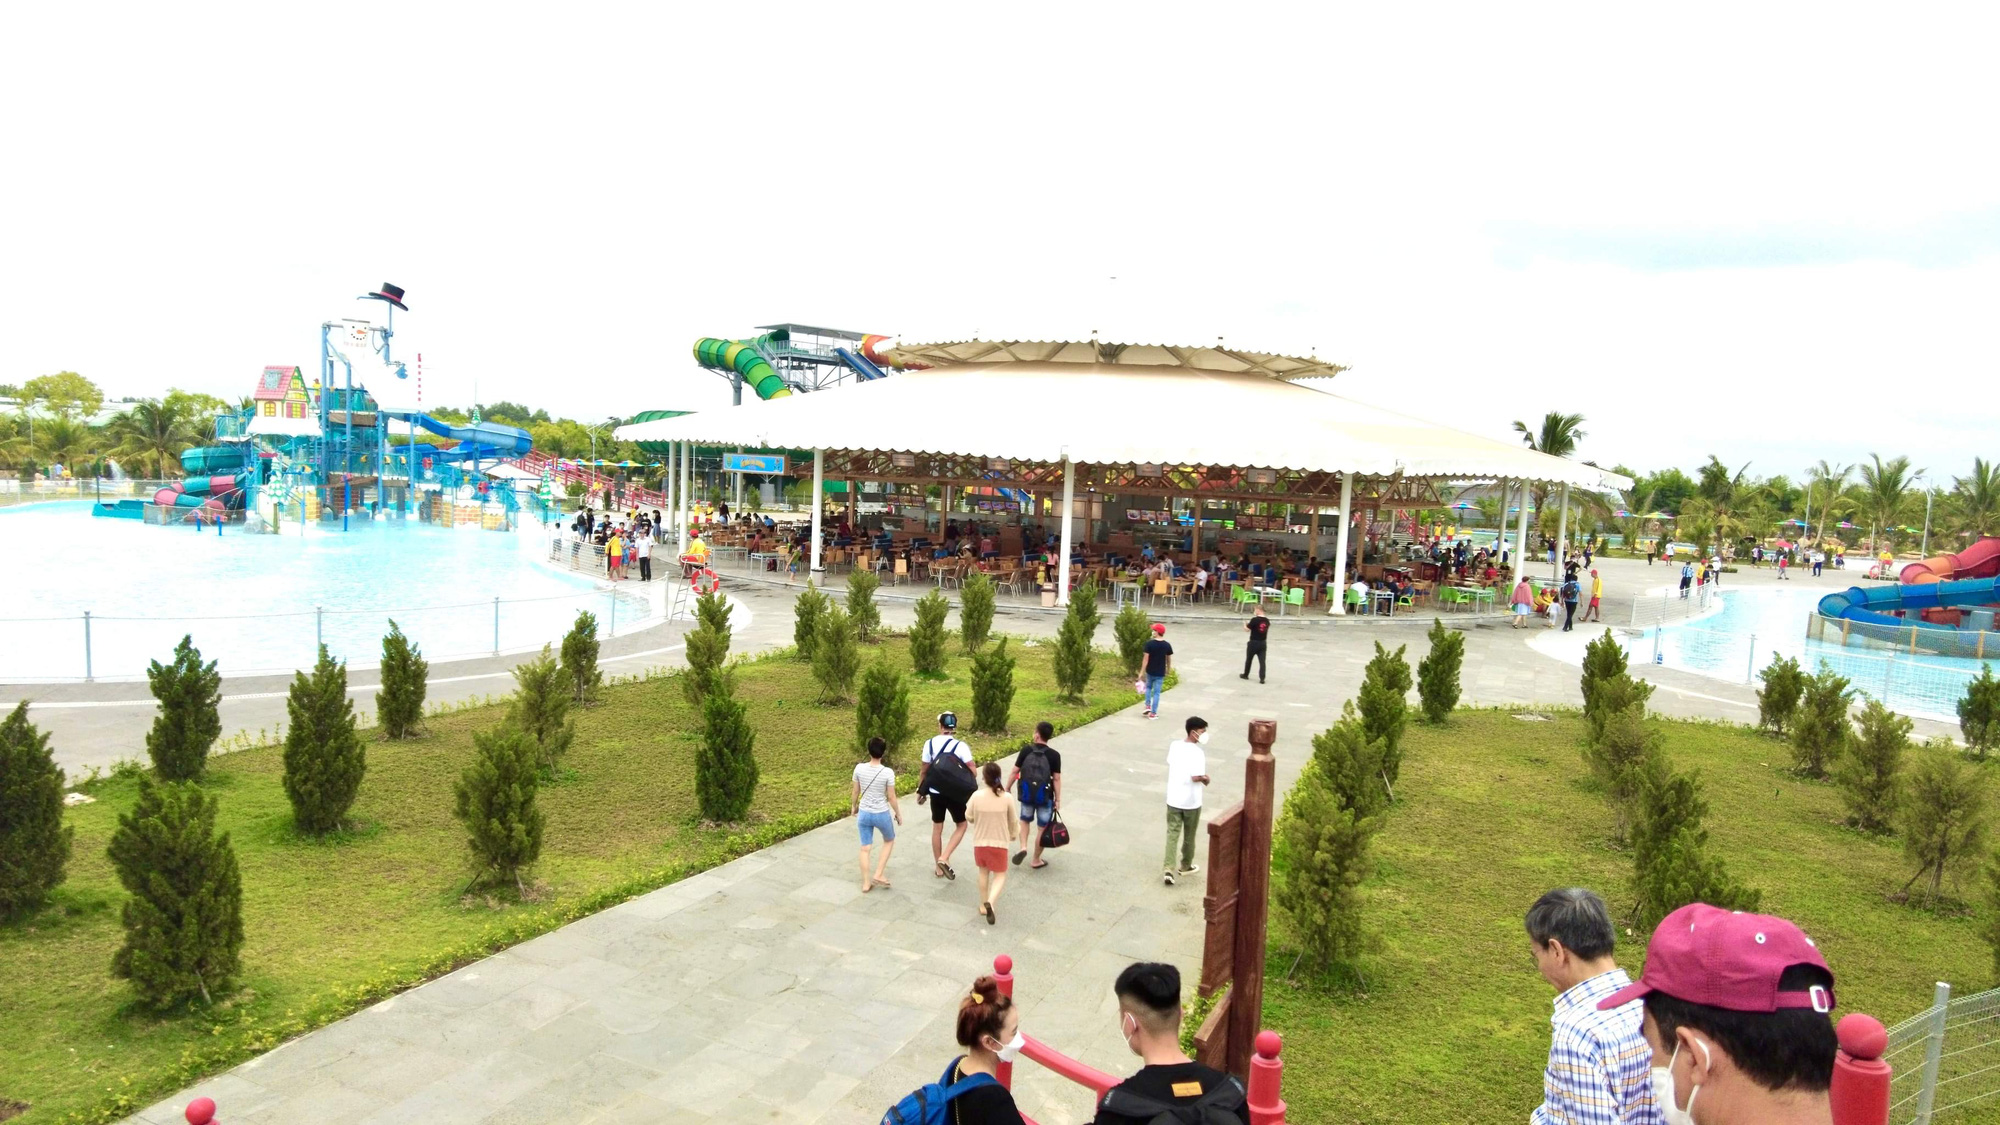 The largest water park in Vietnam officially opened to welcome guests - photo 3.